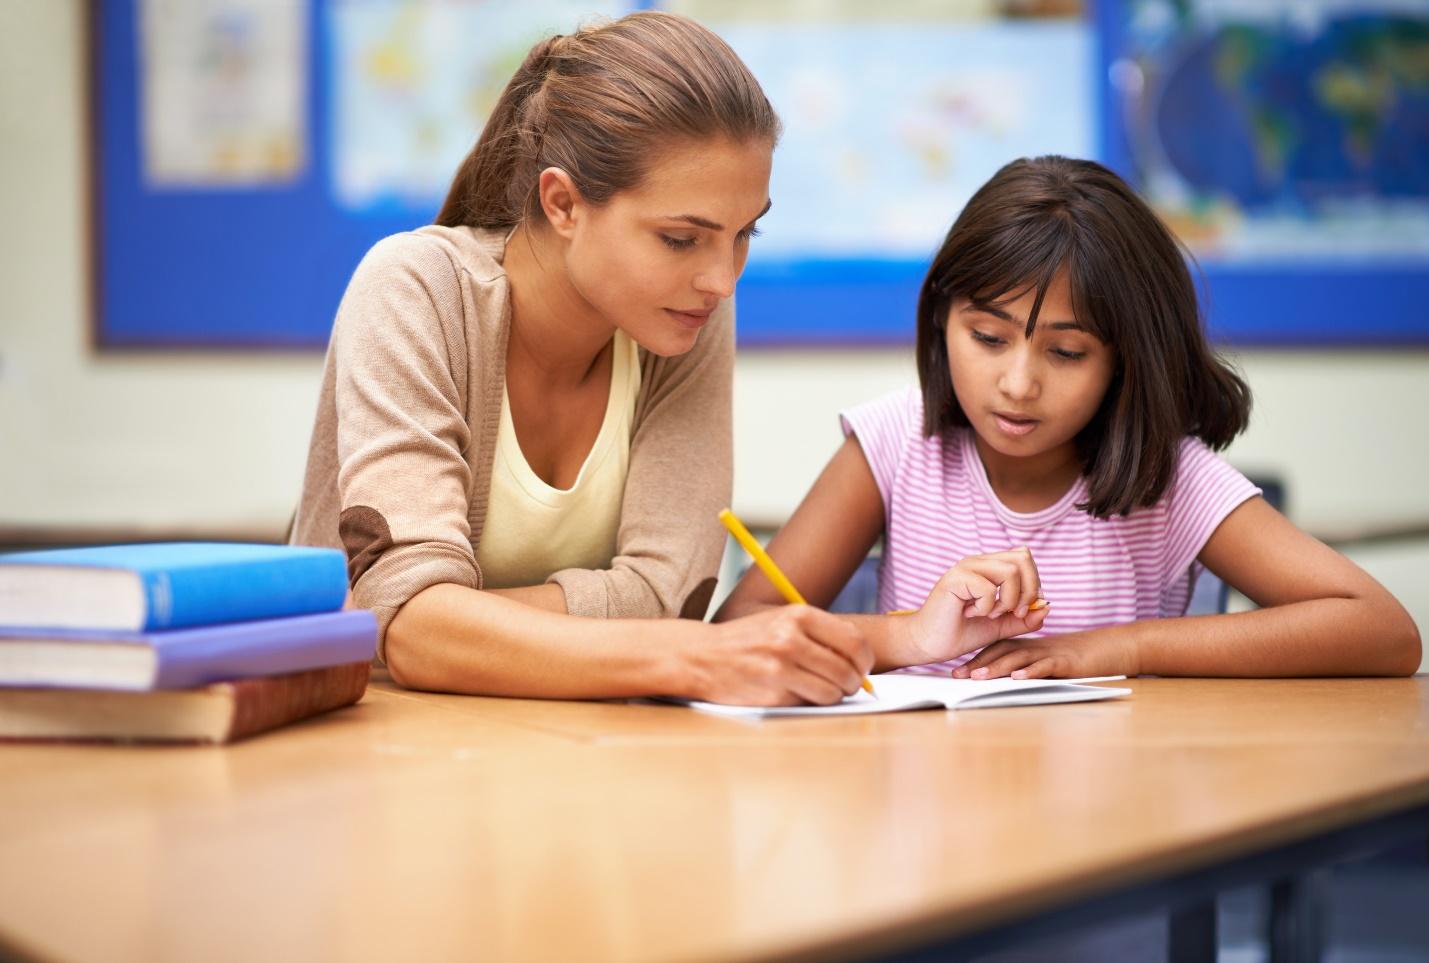 Why Connecting Tutoring to Curriculum Could Make it More Effective